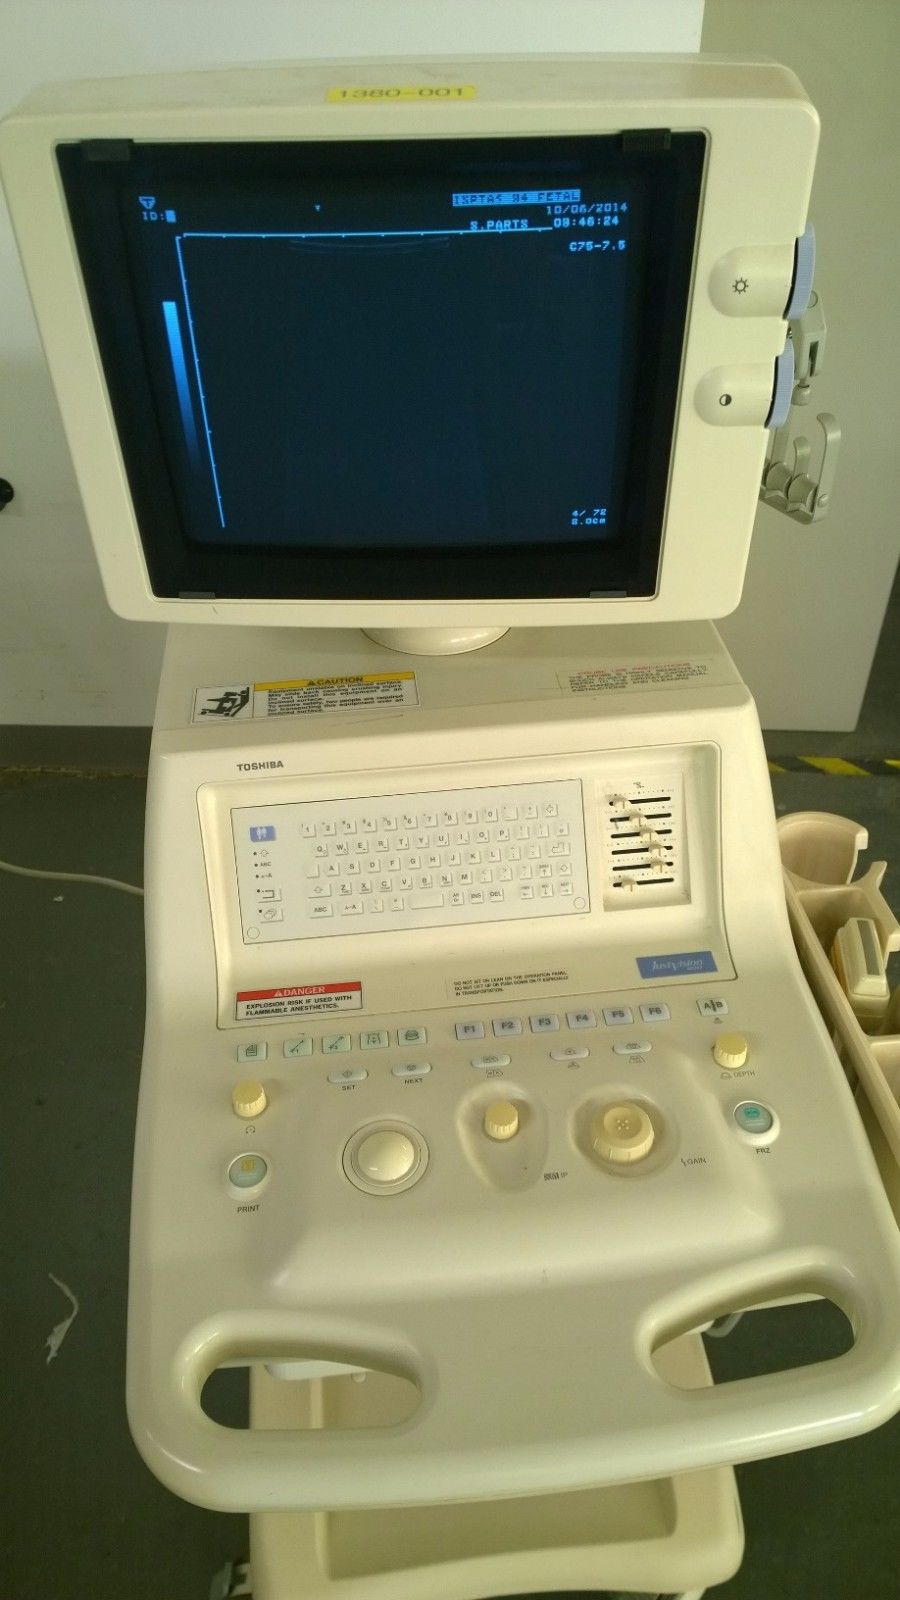 Toshiba SSA-325A Justvision 400 2001 Ultrasound DIAGNOSTIC ULTRASOUND MACHINES FOR SALE